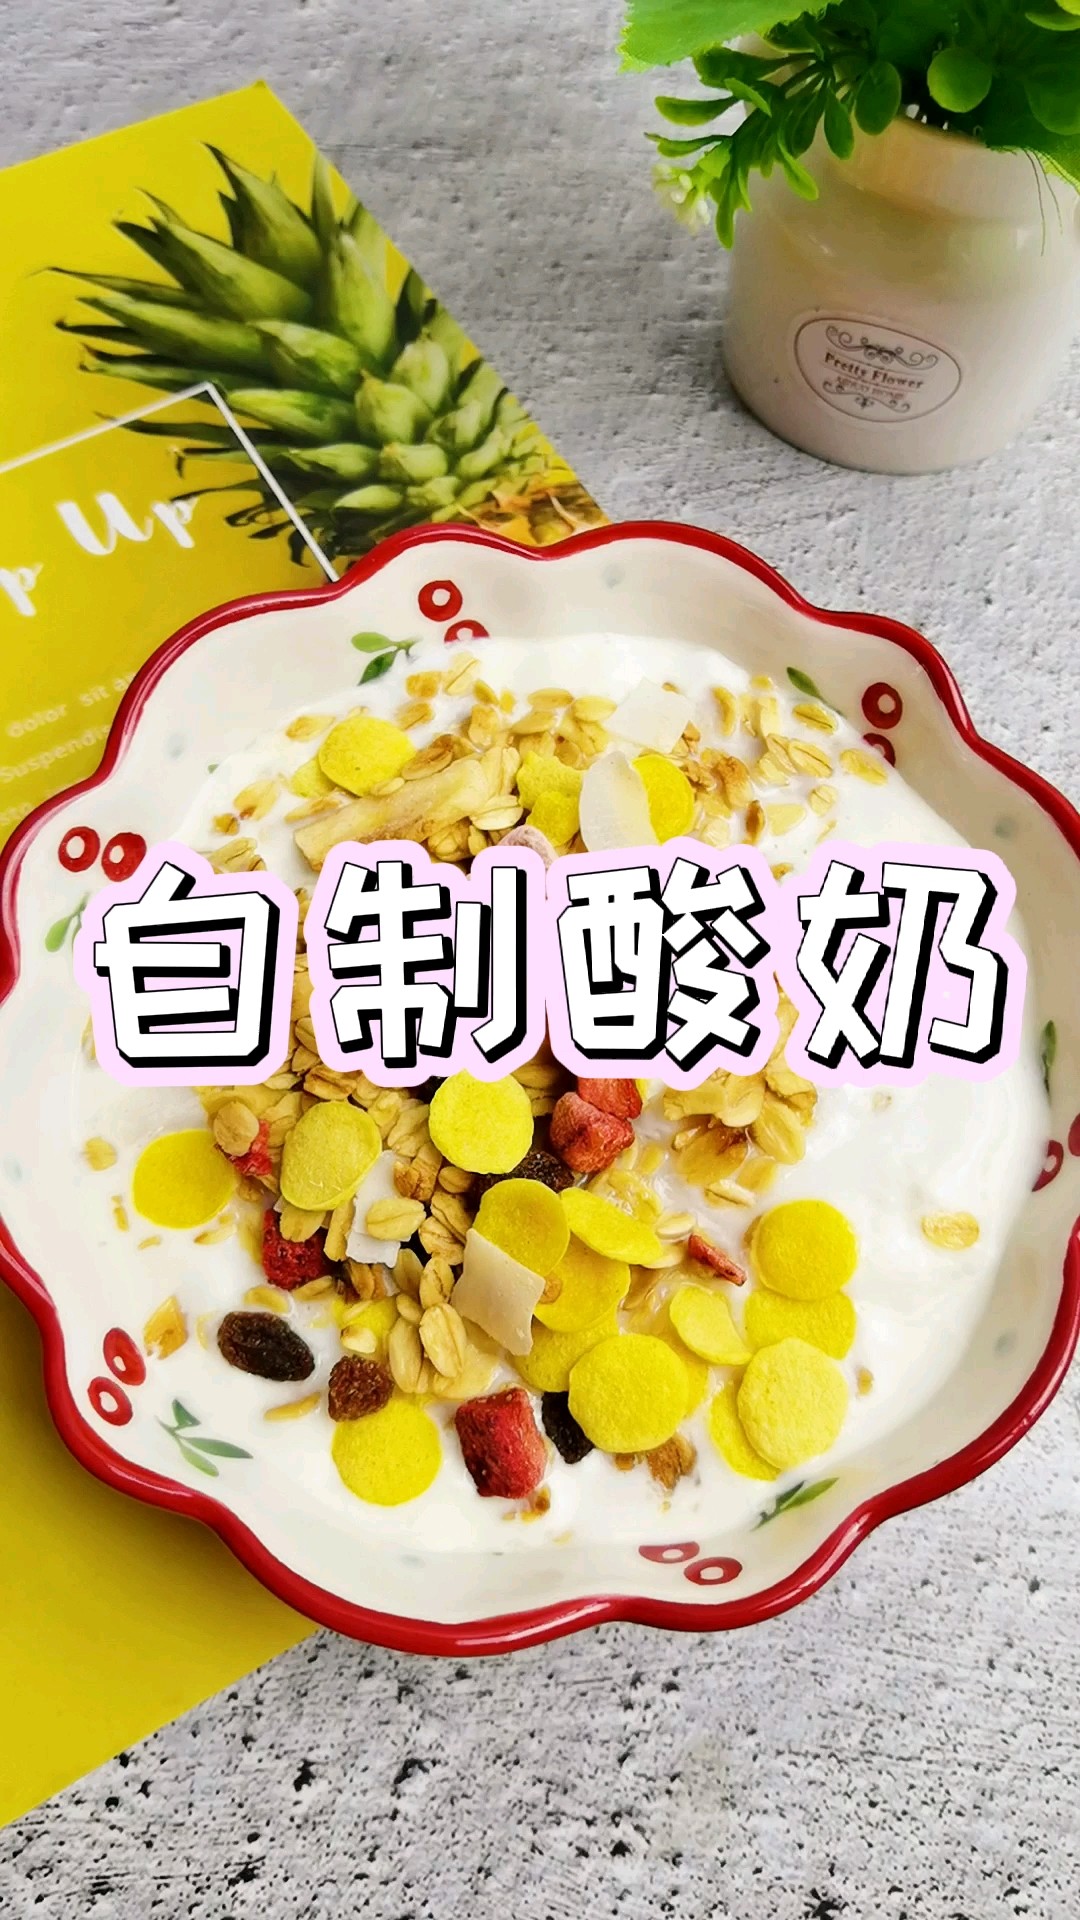 6 Yuan Milk Made into A Large Bowl of Flavored Yogurt, Affordable and Delicious recipe